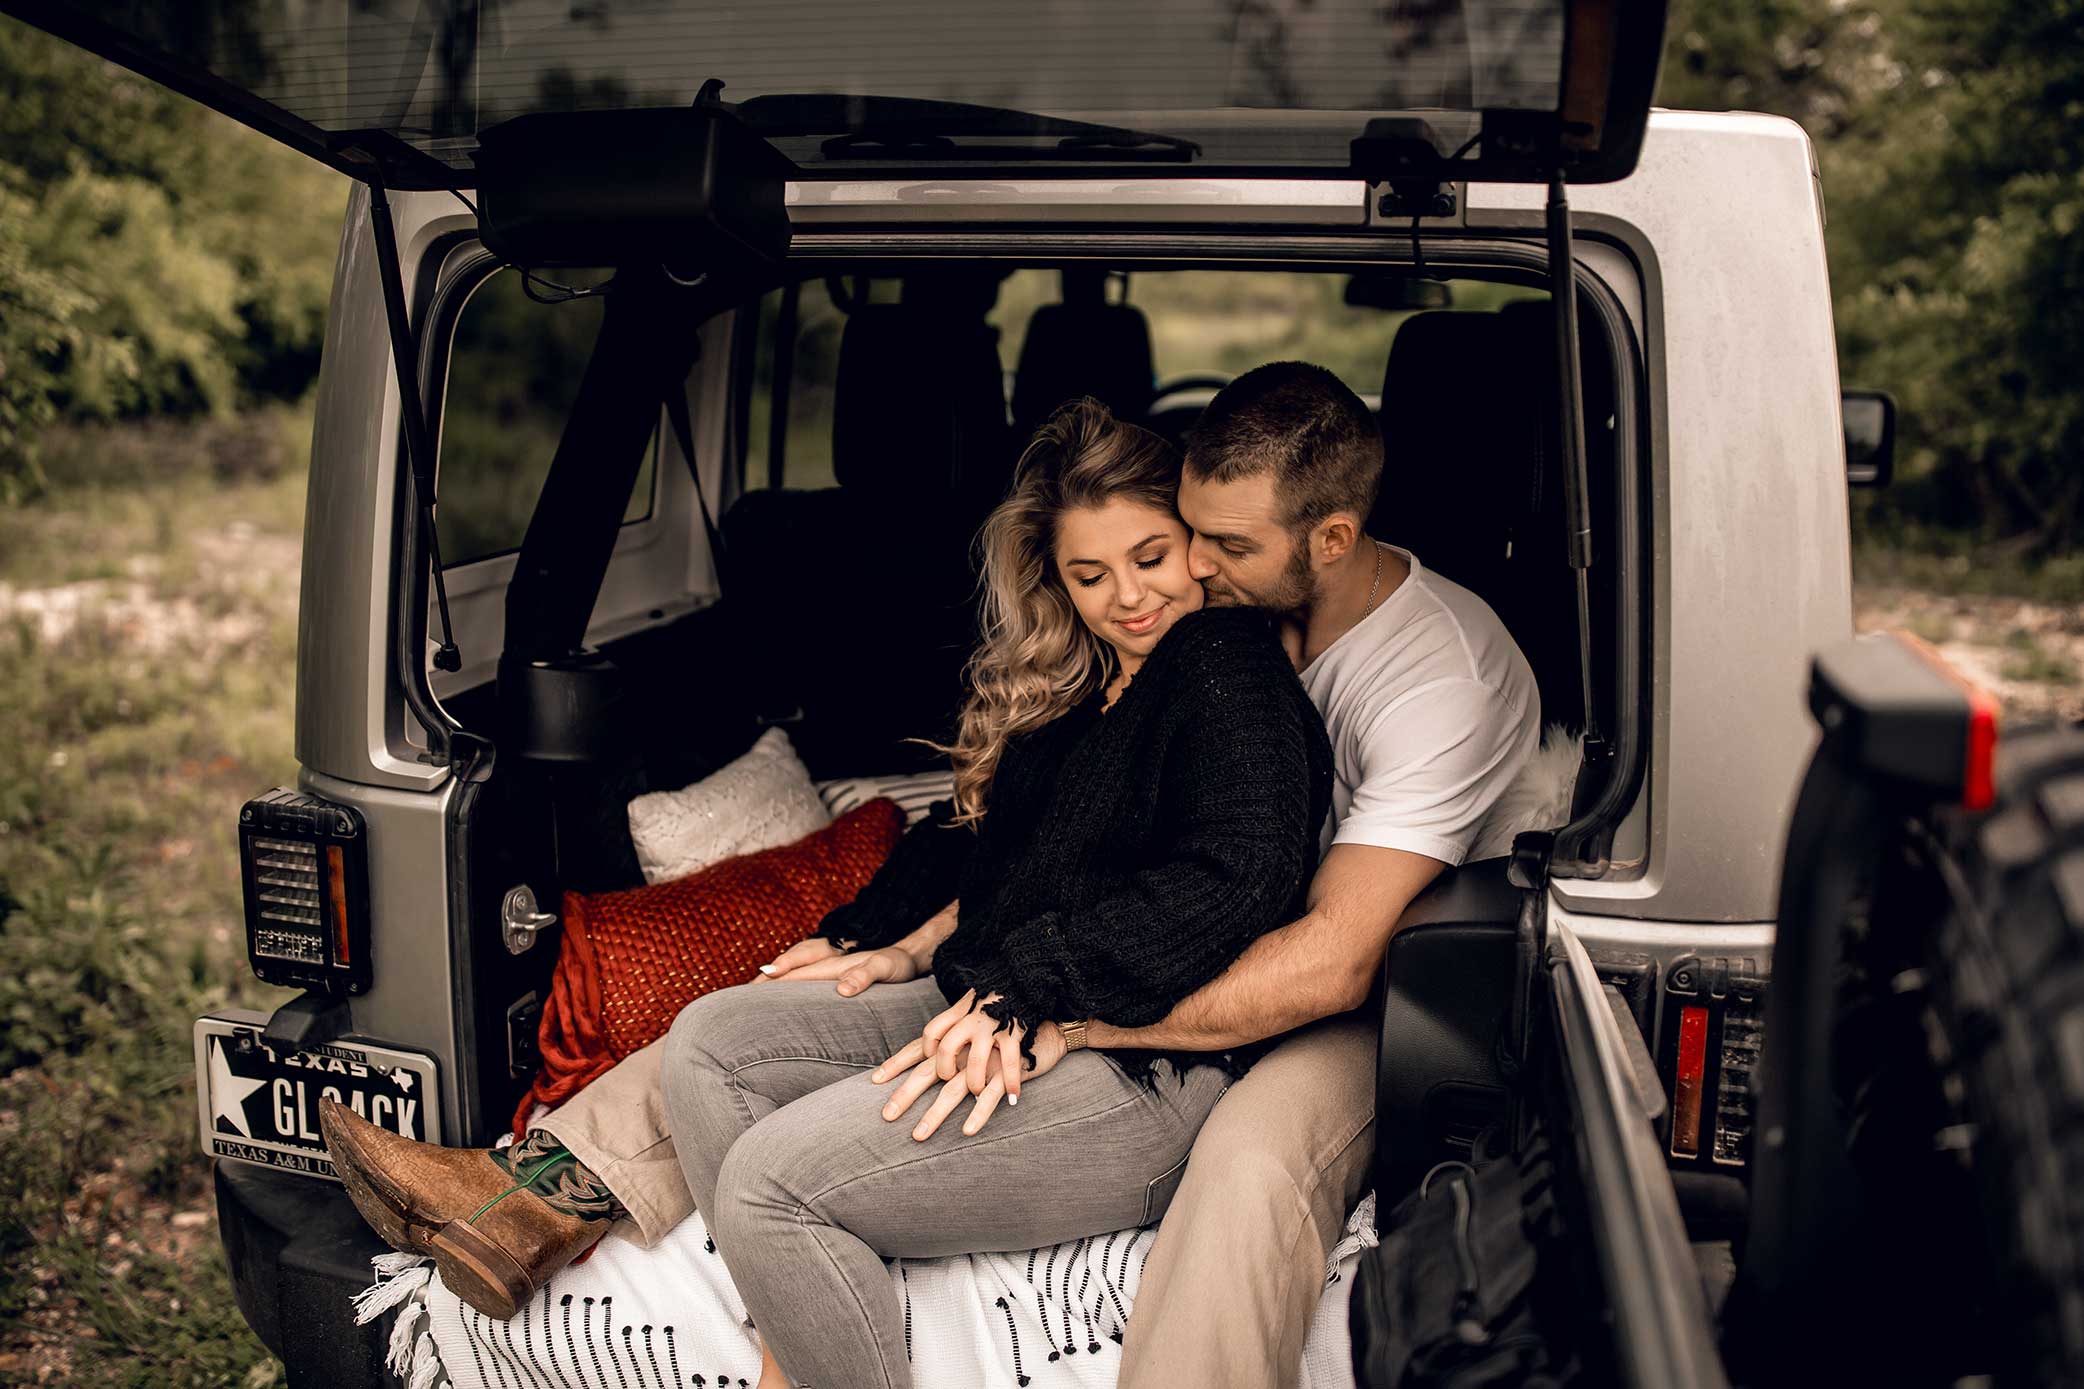 shelby-schiller-photography-lifestyle-couples-remi-colt-outdoor-jeep-adventure-4.jpg